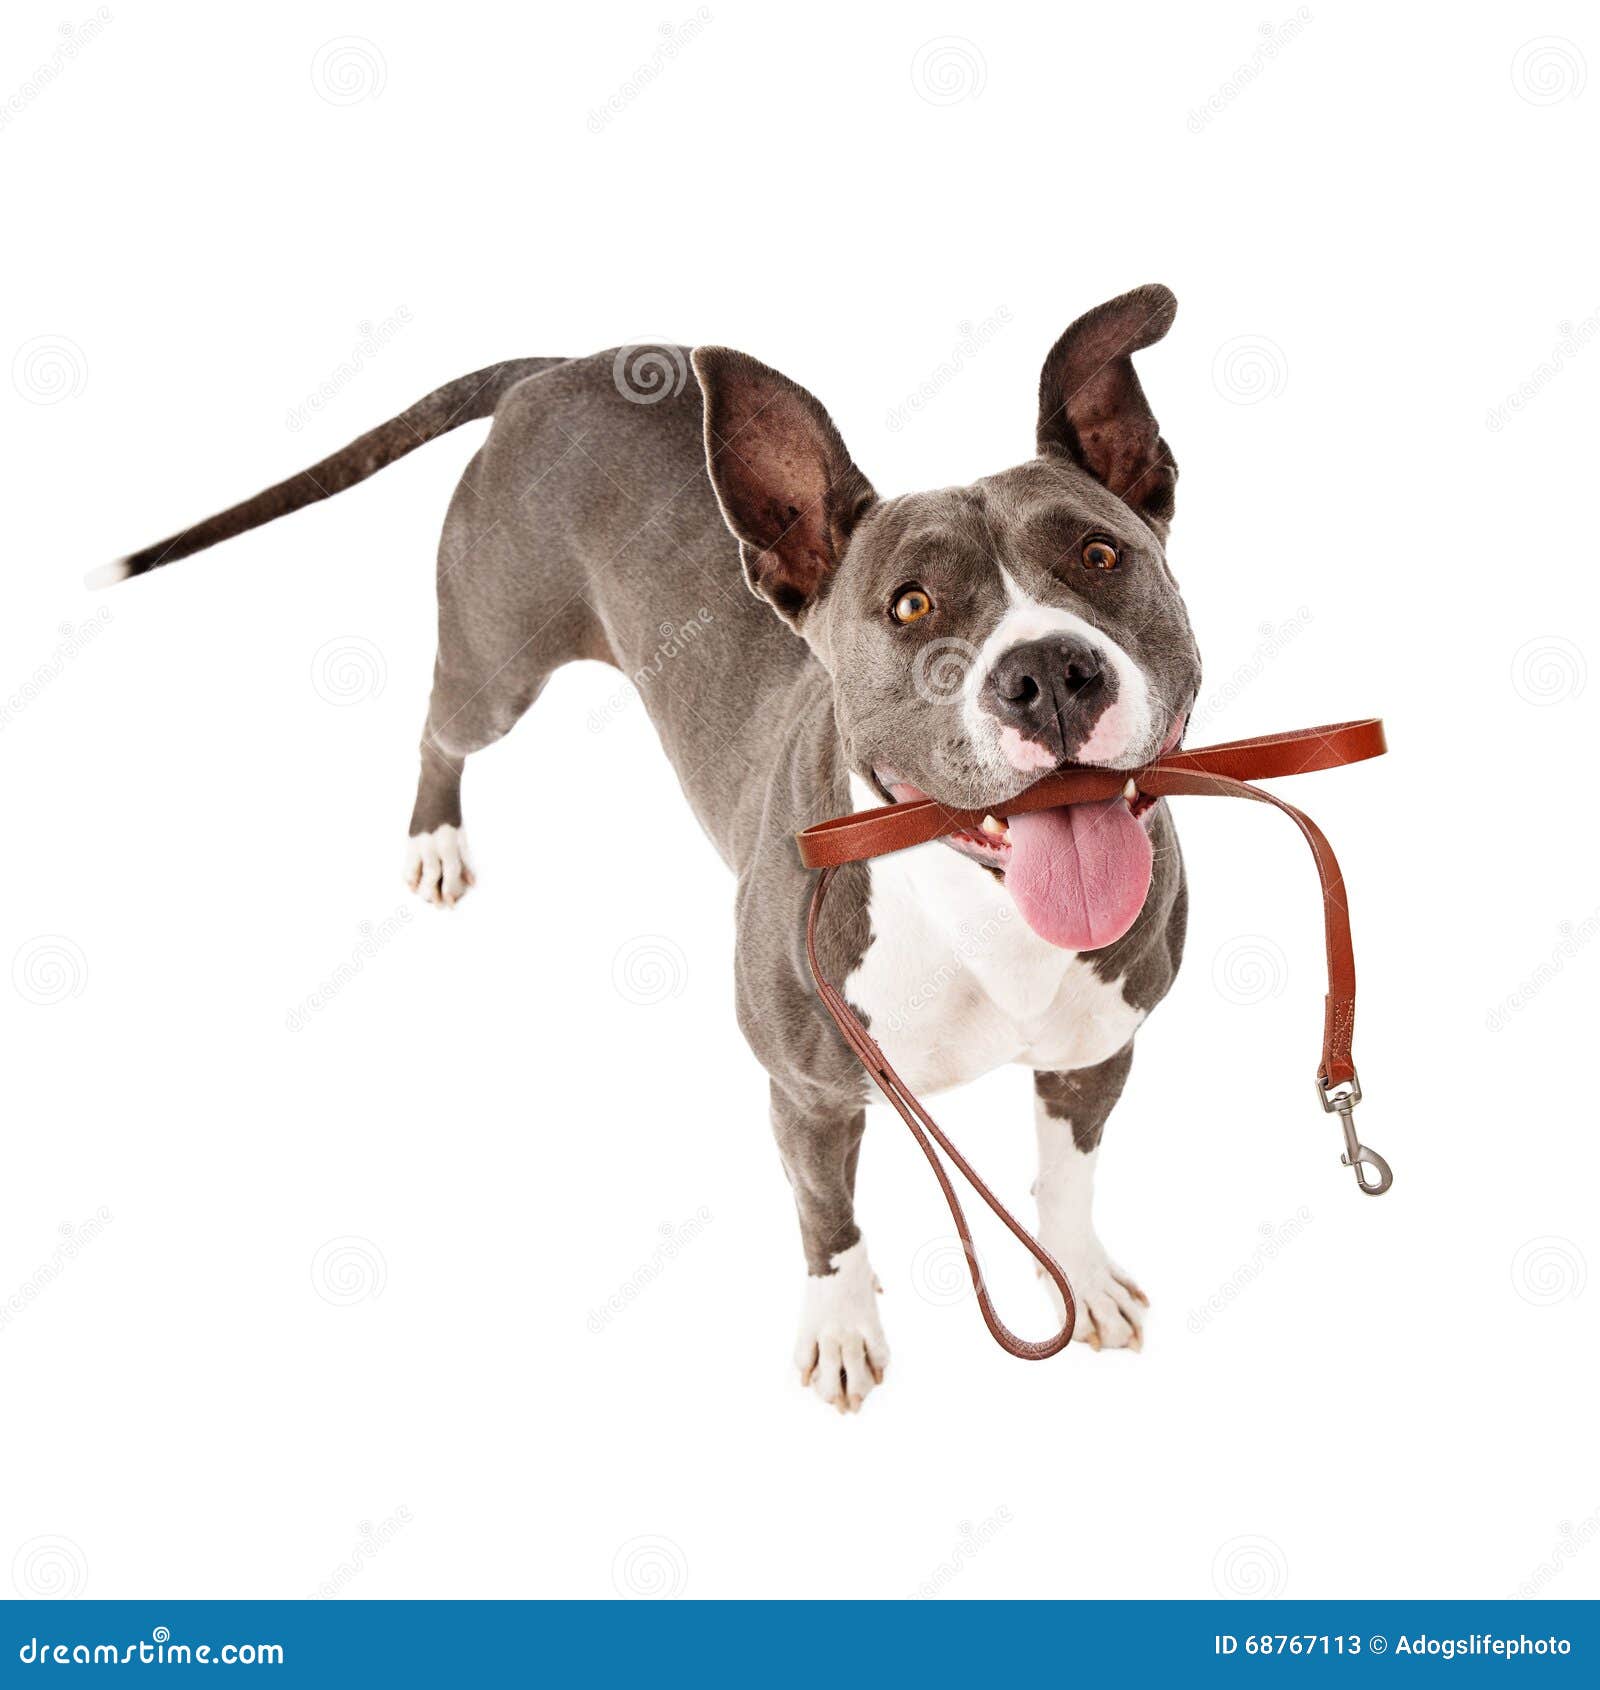 excited dog with leash ready for walk